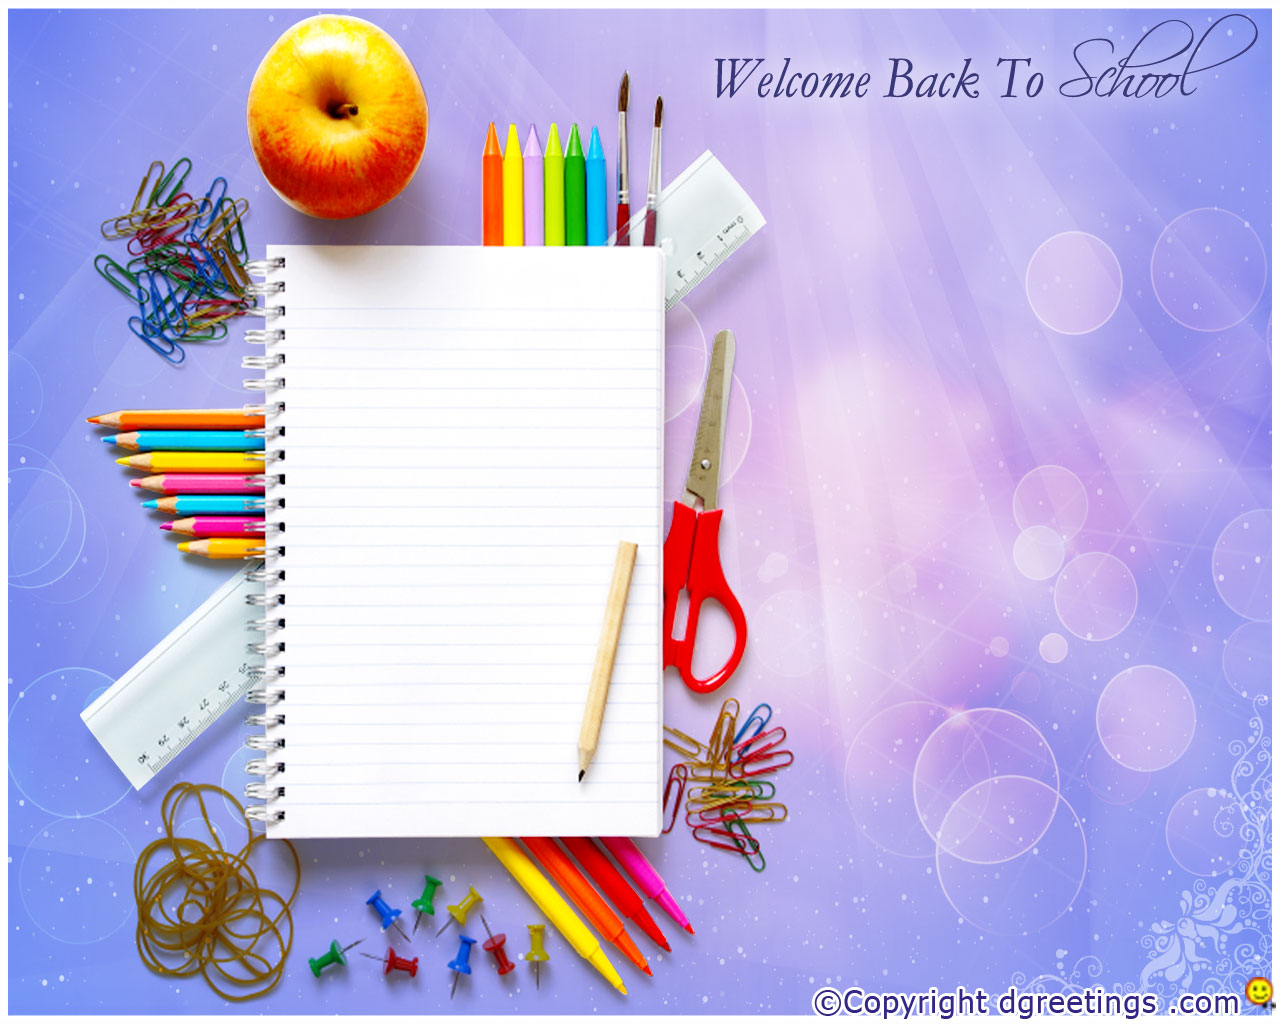 Back to School wallpapers Free Back to School Wallpapers Wallpapers